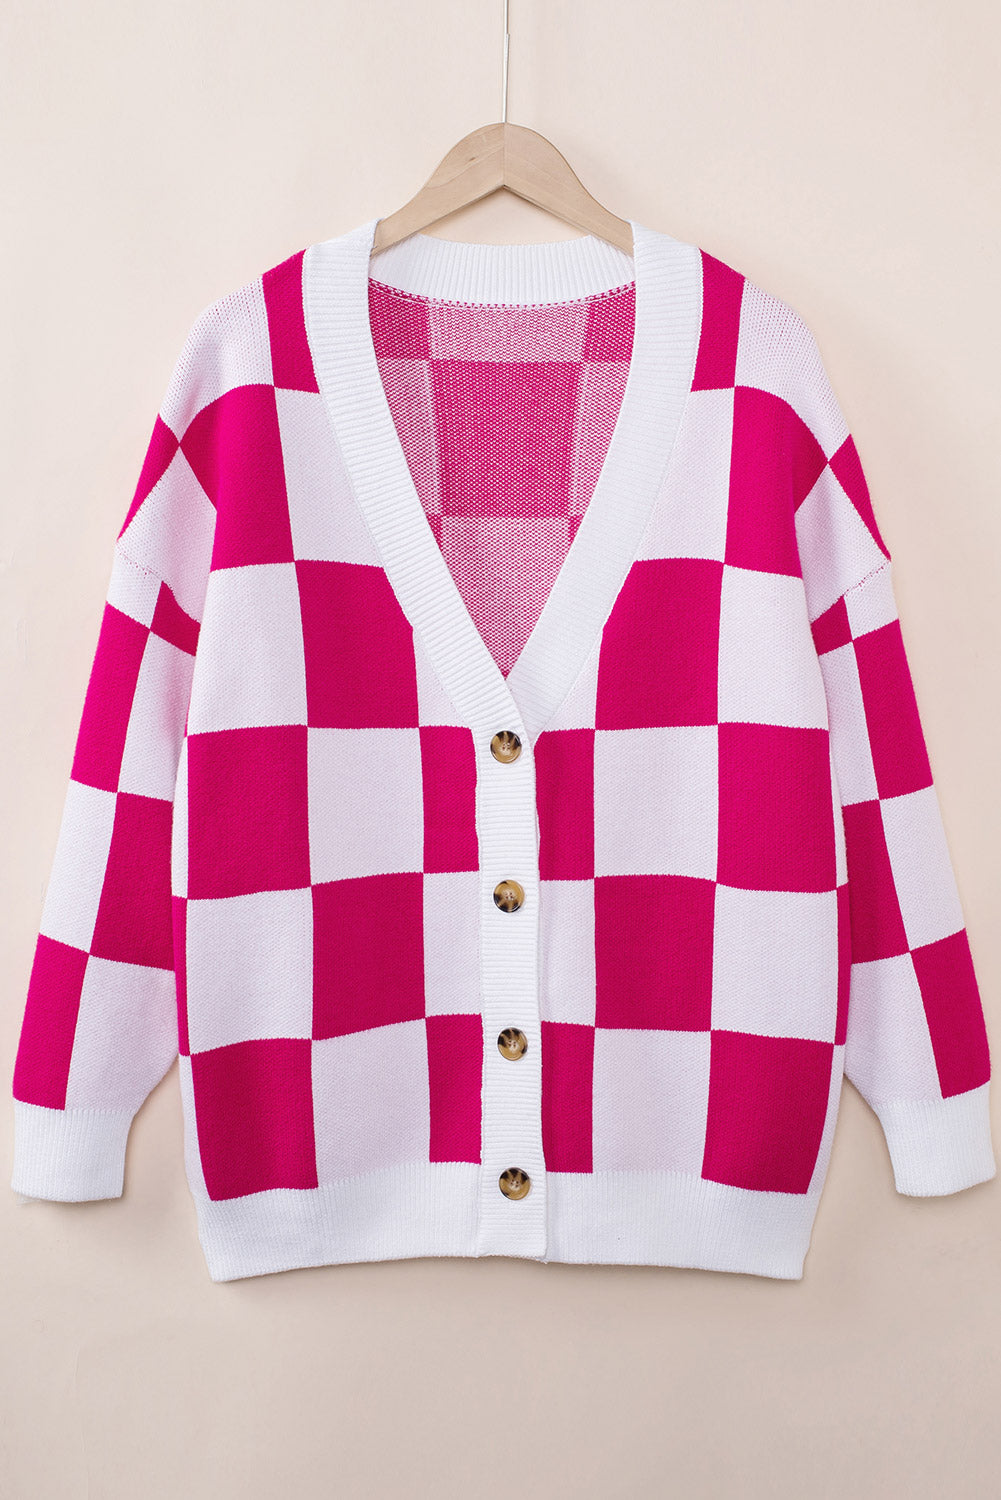 LC271943-P6-S, LC271943-P6-M, LC271943-P6-L, LC271943-P6-XL, LC271943-P6-2XL, Rose Red Contrast Checkered Print Button Up Sweater Cardigan 